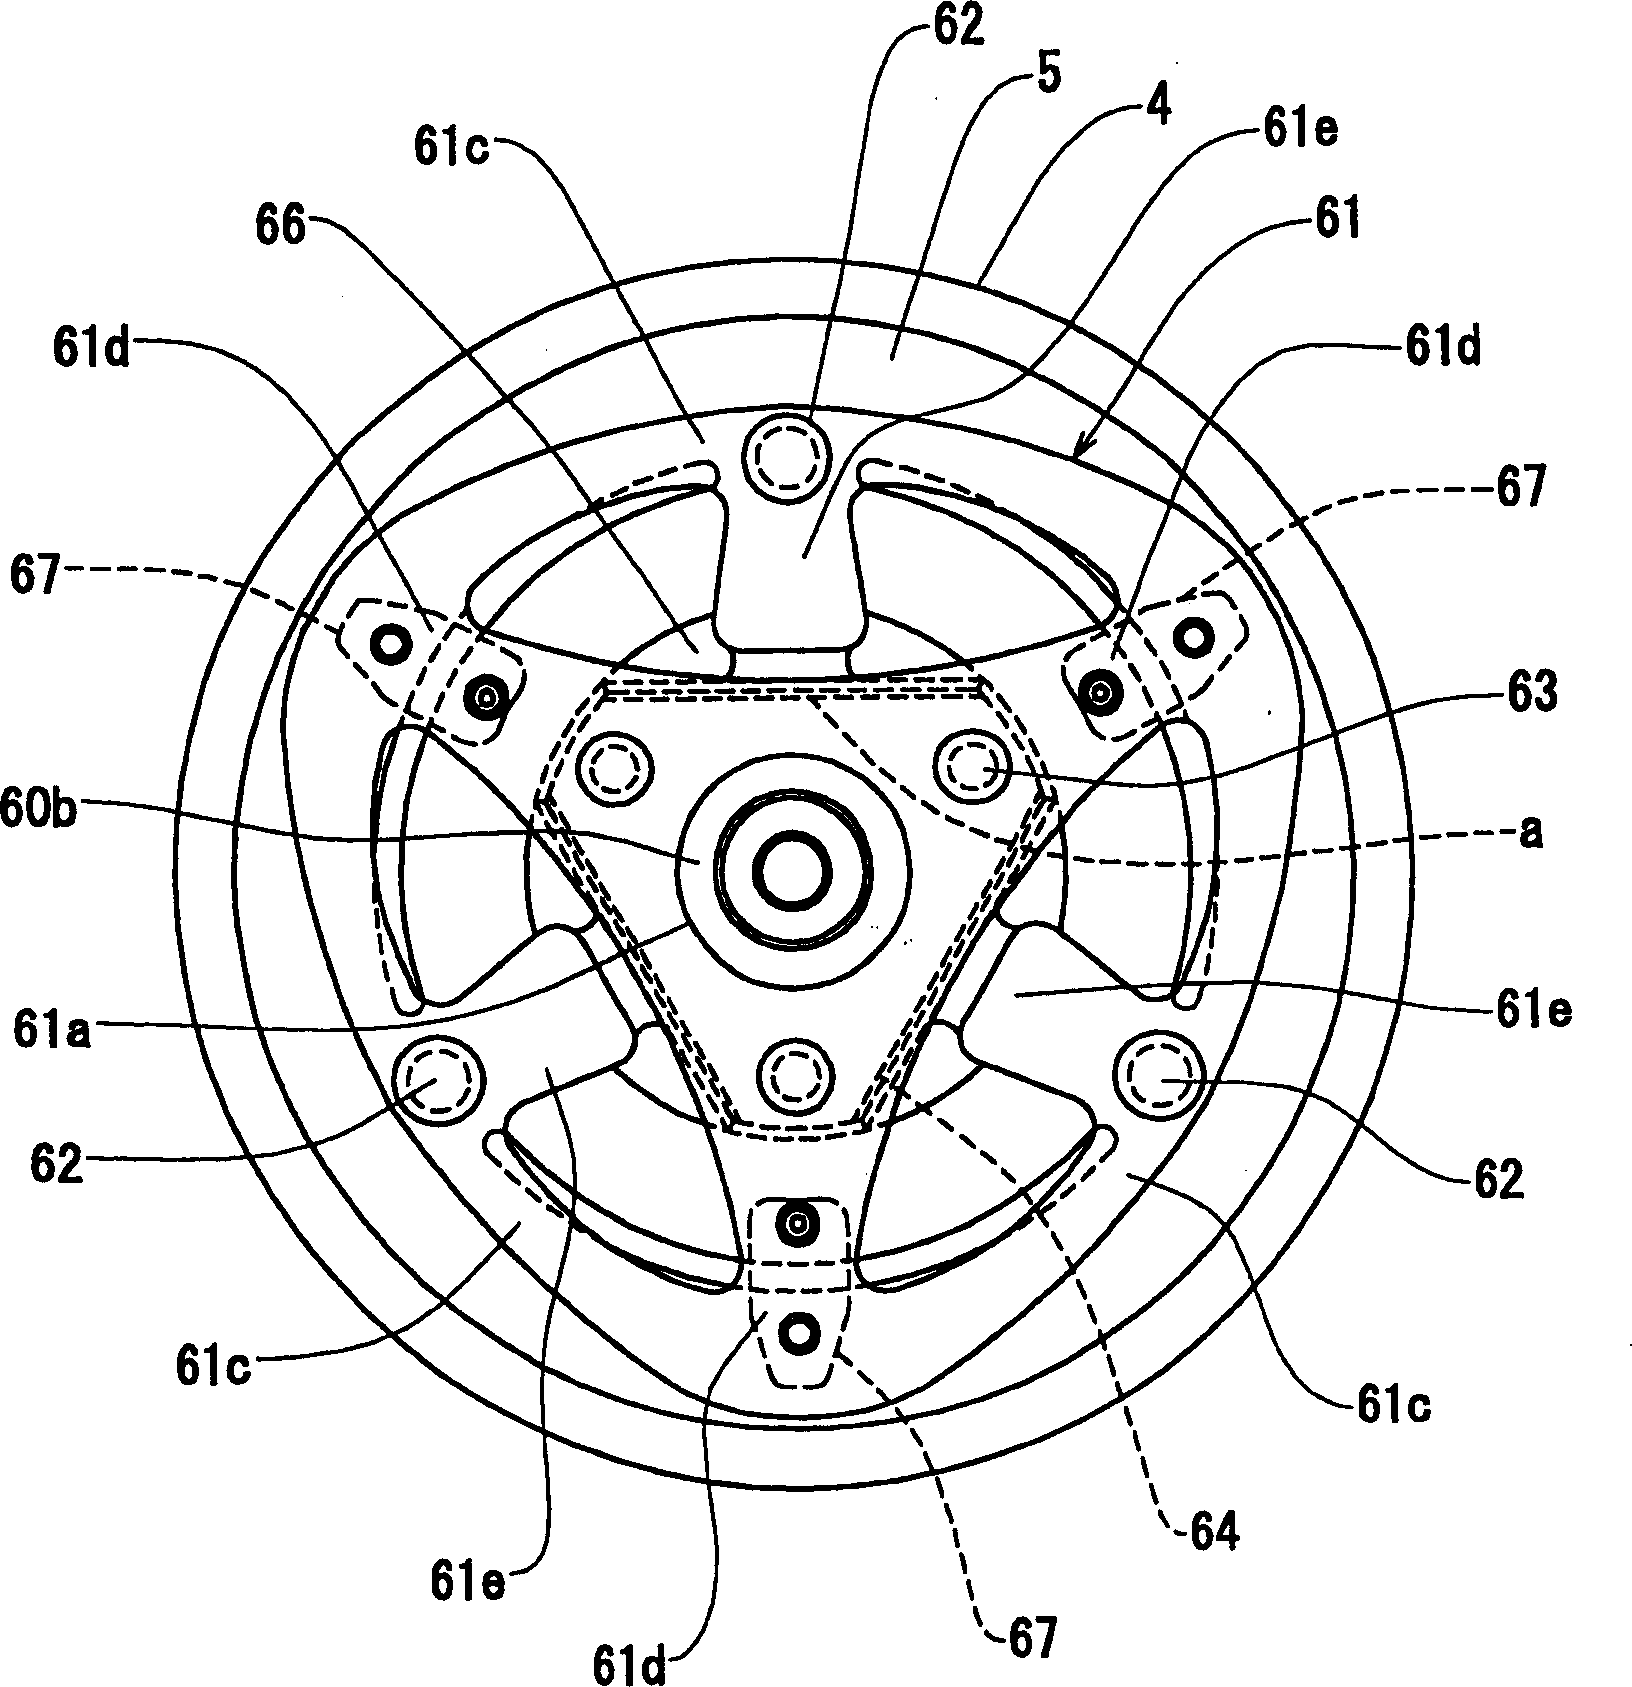 Electronmagnetic clutch